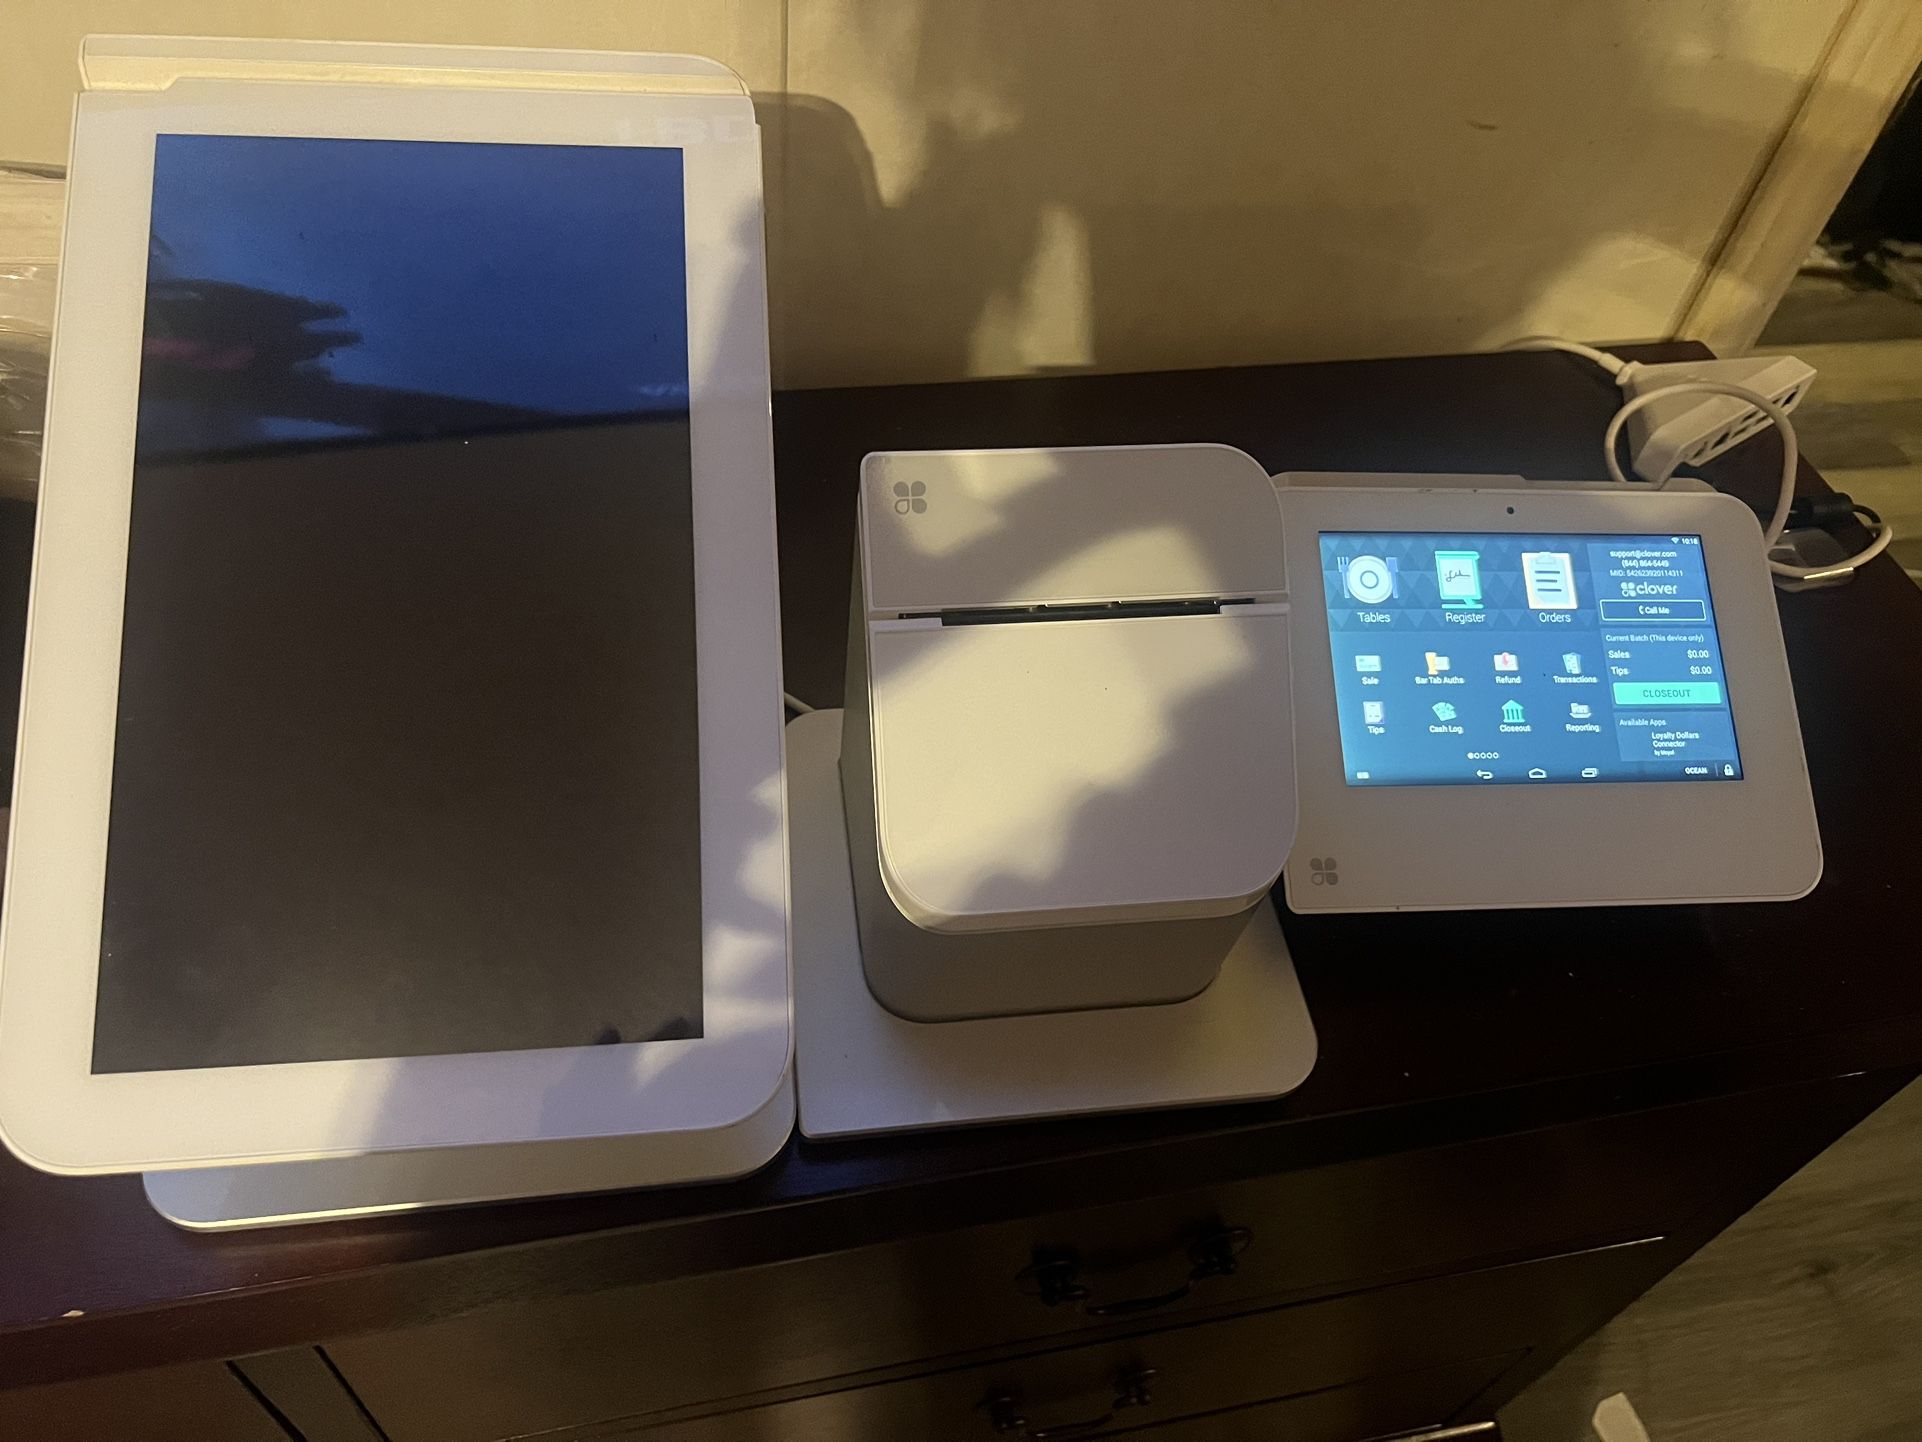 Clover POS system Complete With The Clover Minis, Printers, And Main Terminal! bundle Deal For Small Business. Price Is $1999